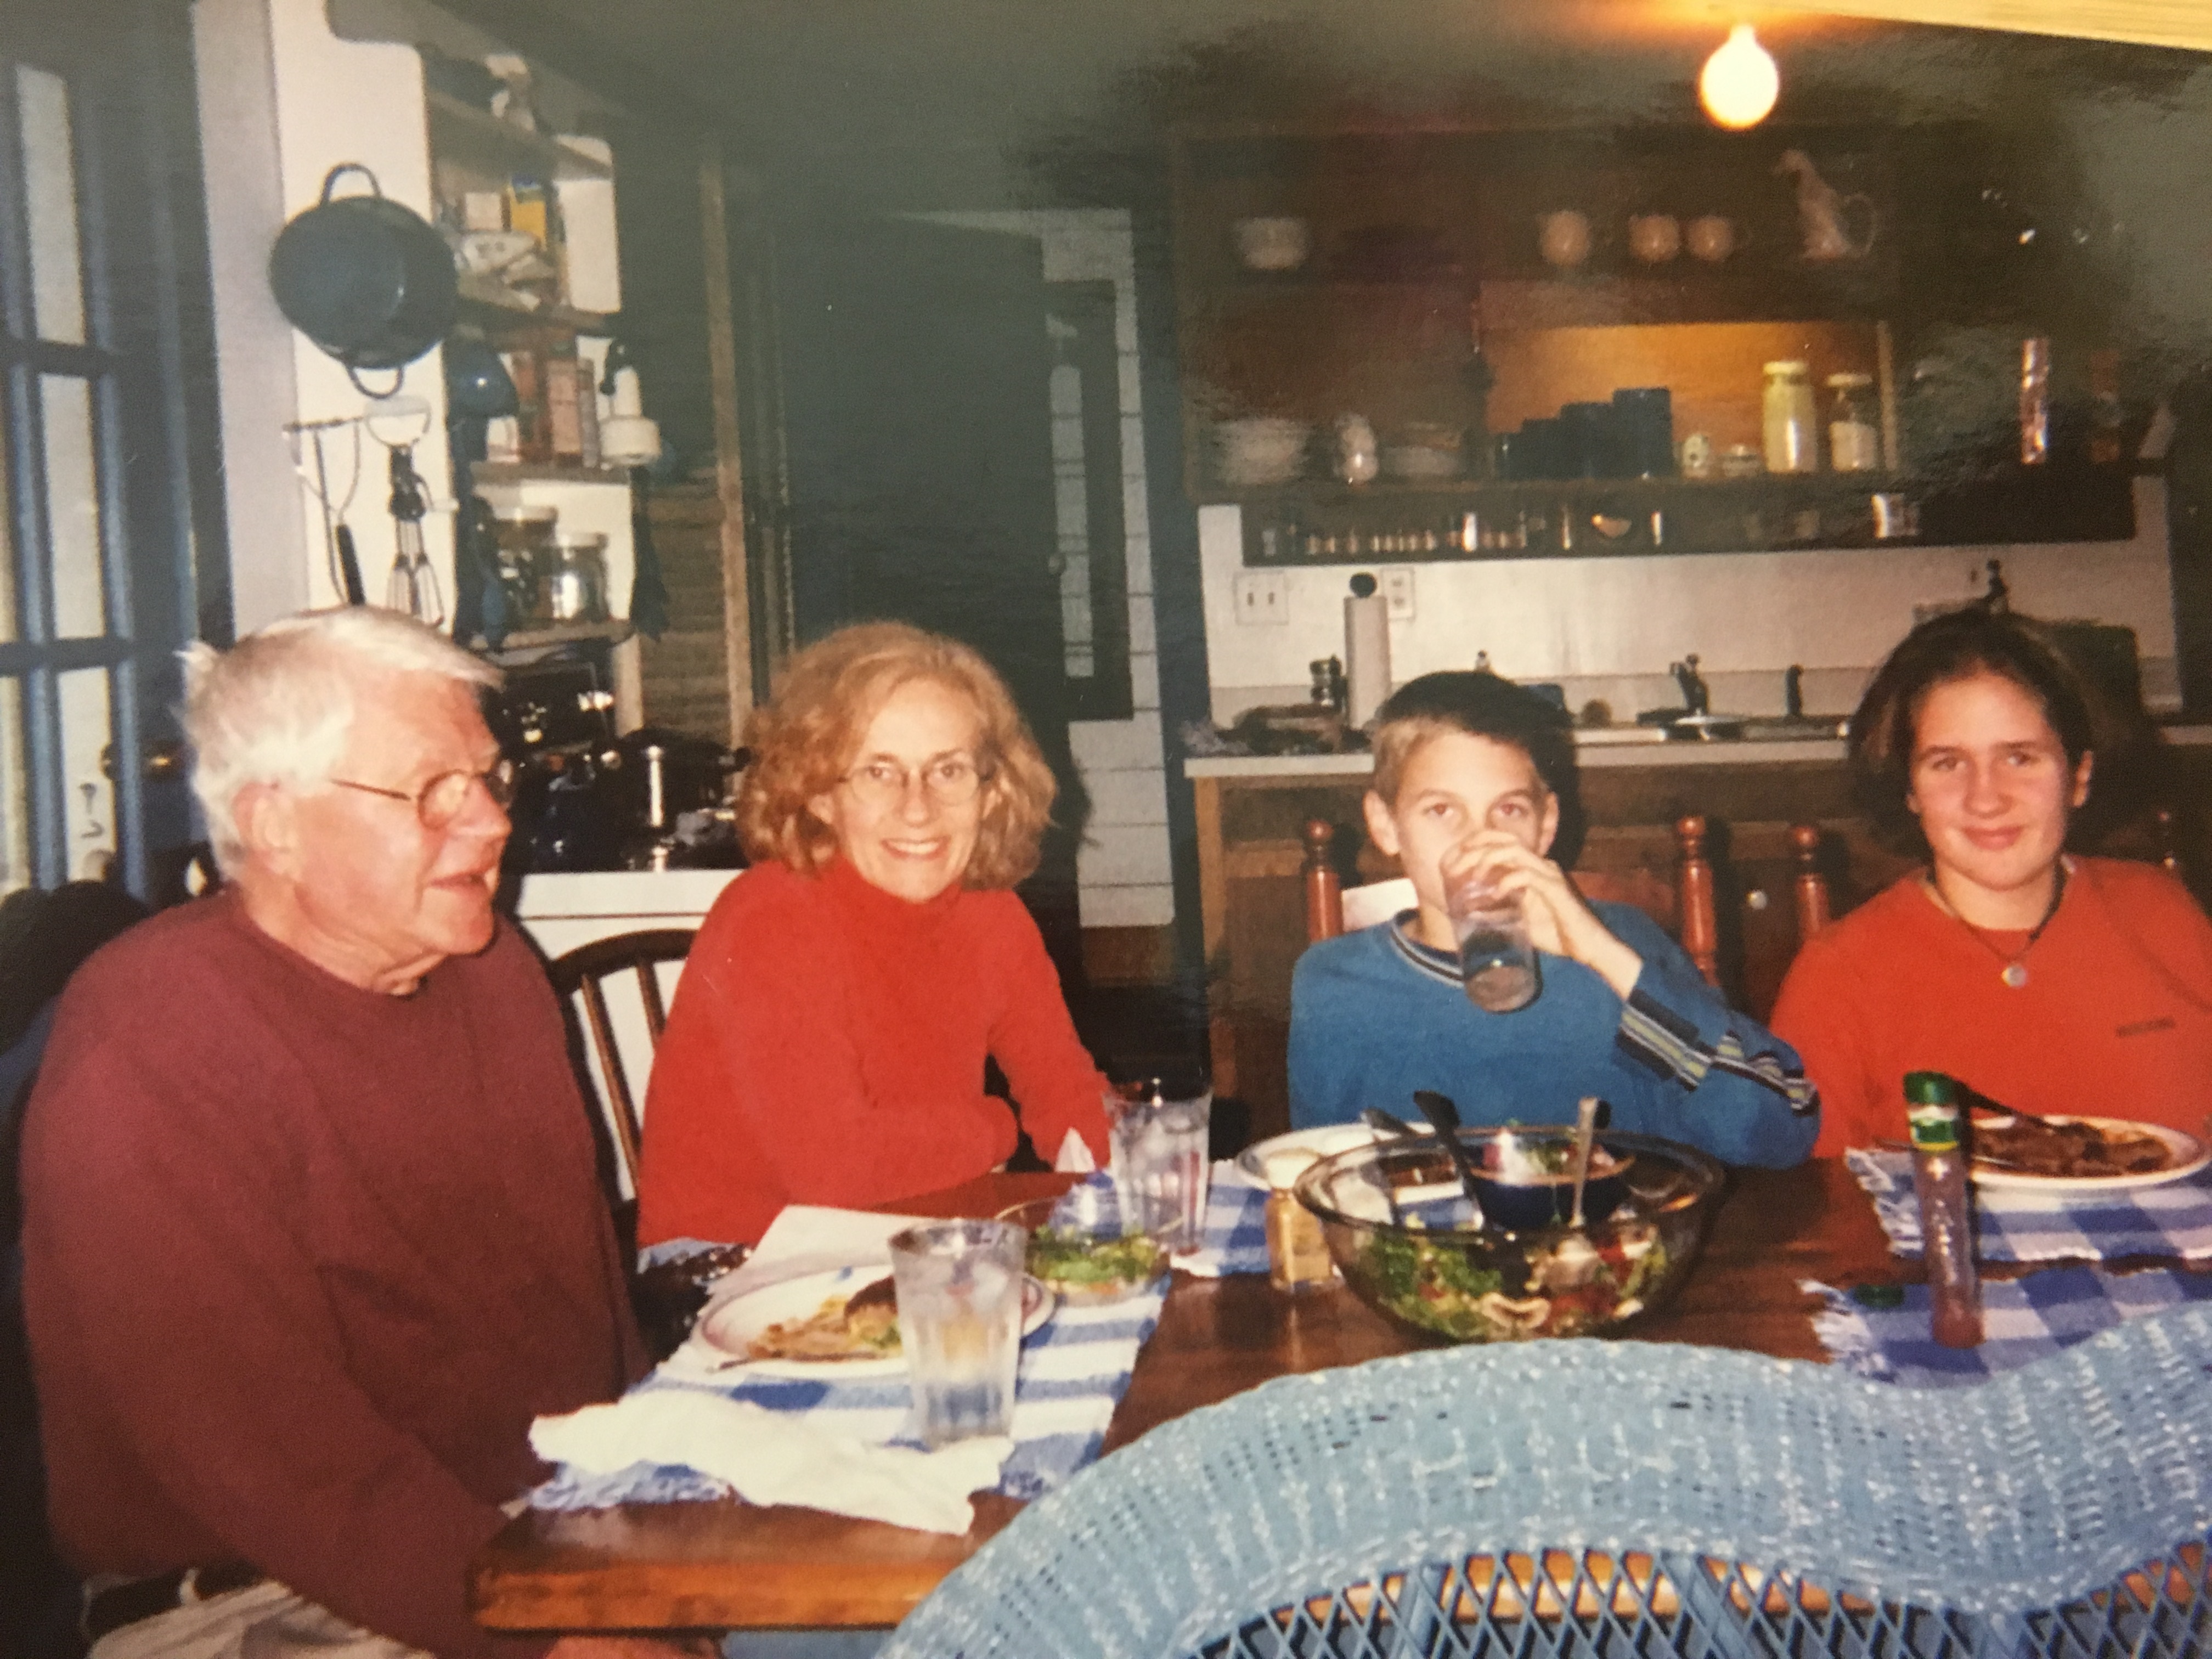 From left to right: Alison Thresher's father, Guy Goodwin, Alison Thresher, Sam Thresher, Hannah Thresher